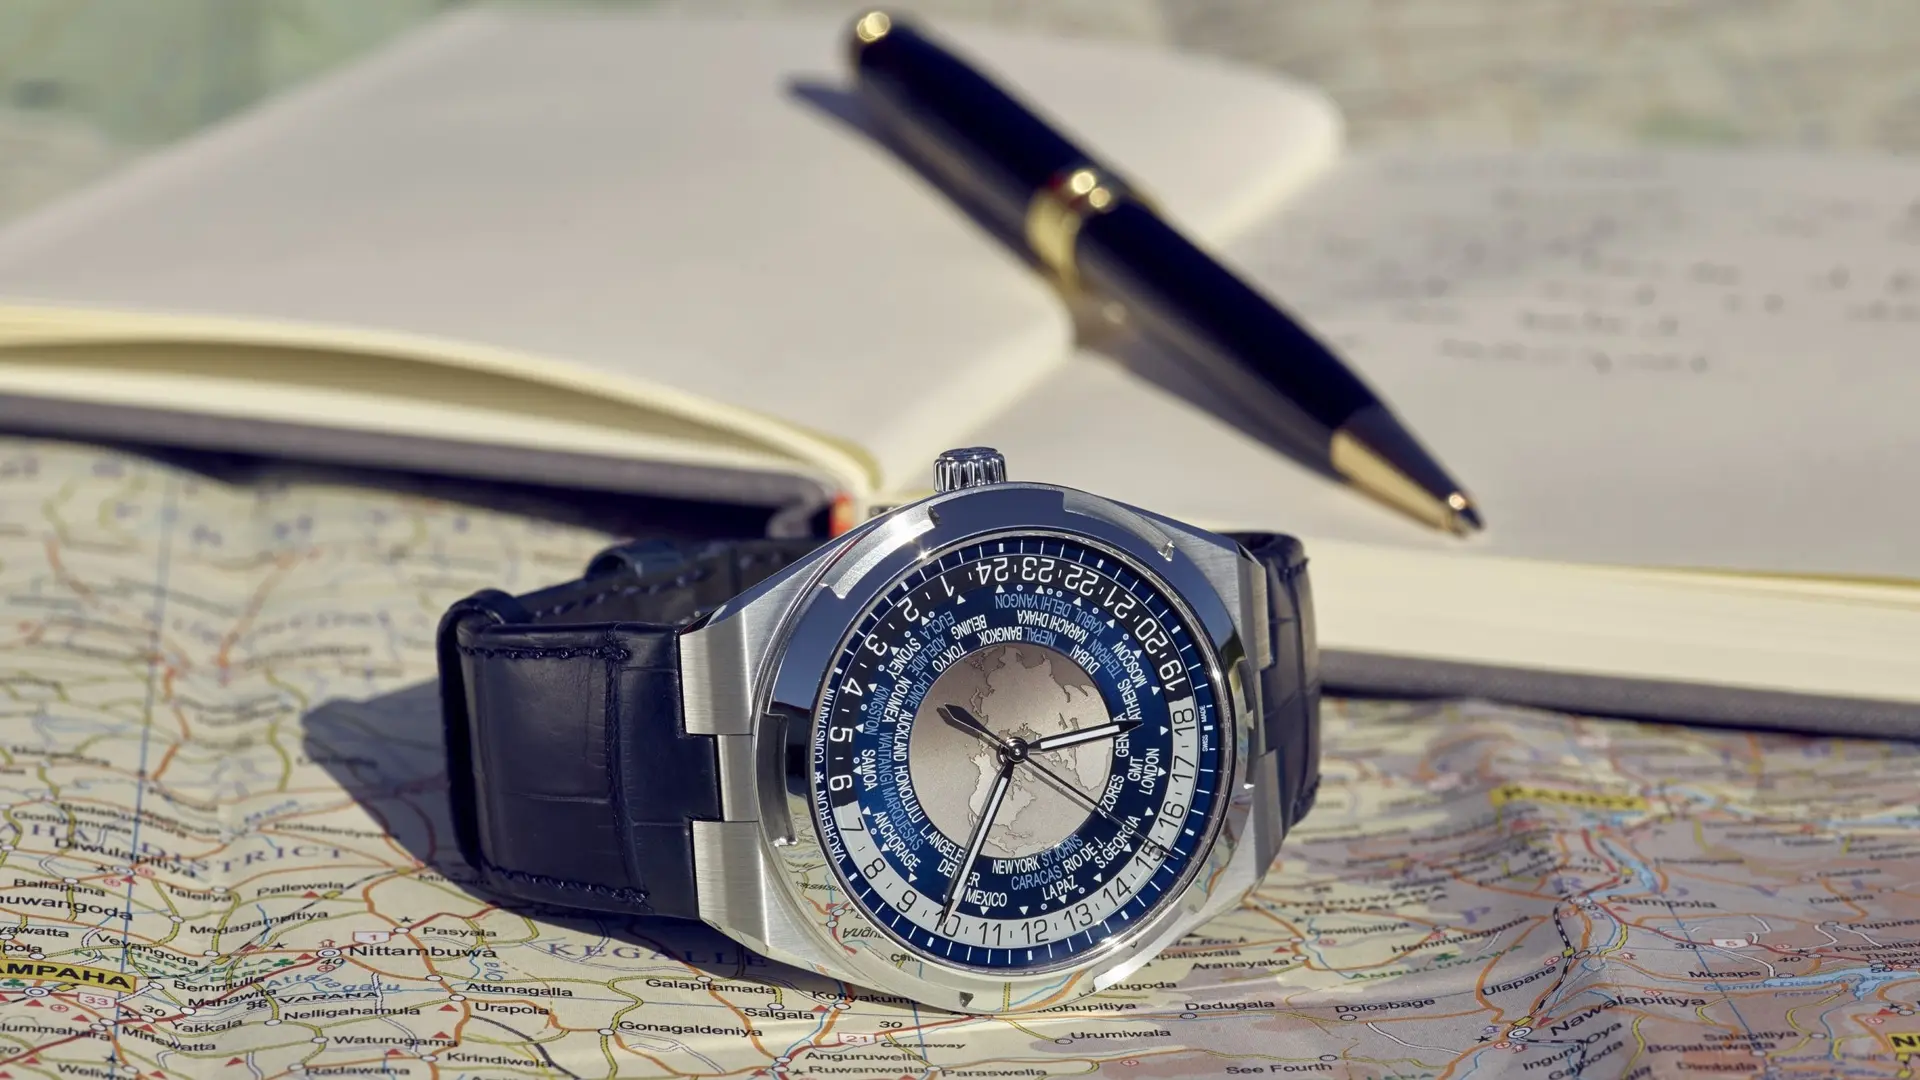 Lifestyle Articles - Ten of the Best Travel Watches - 5